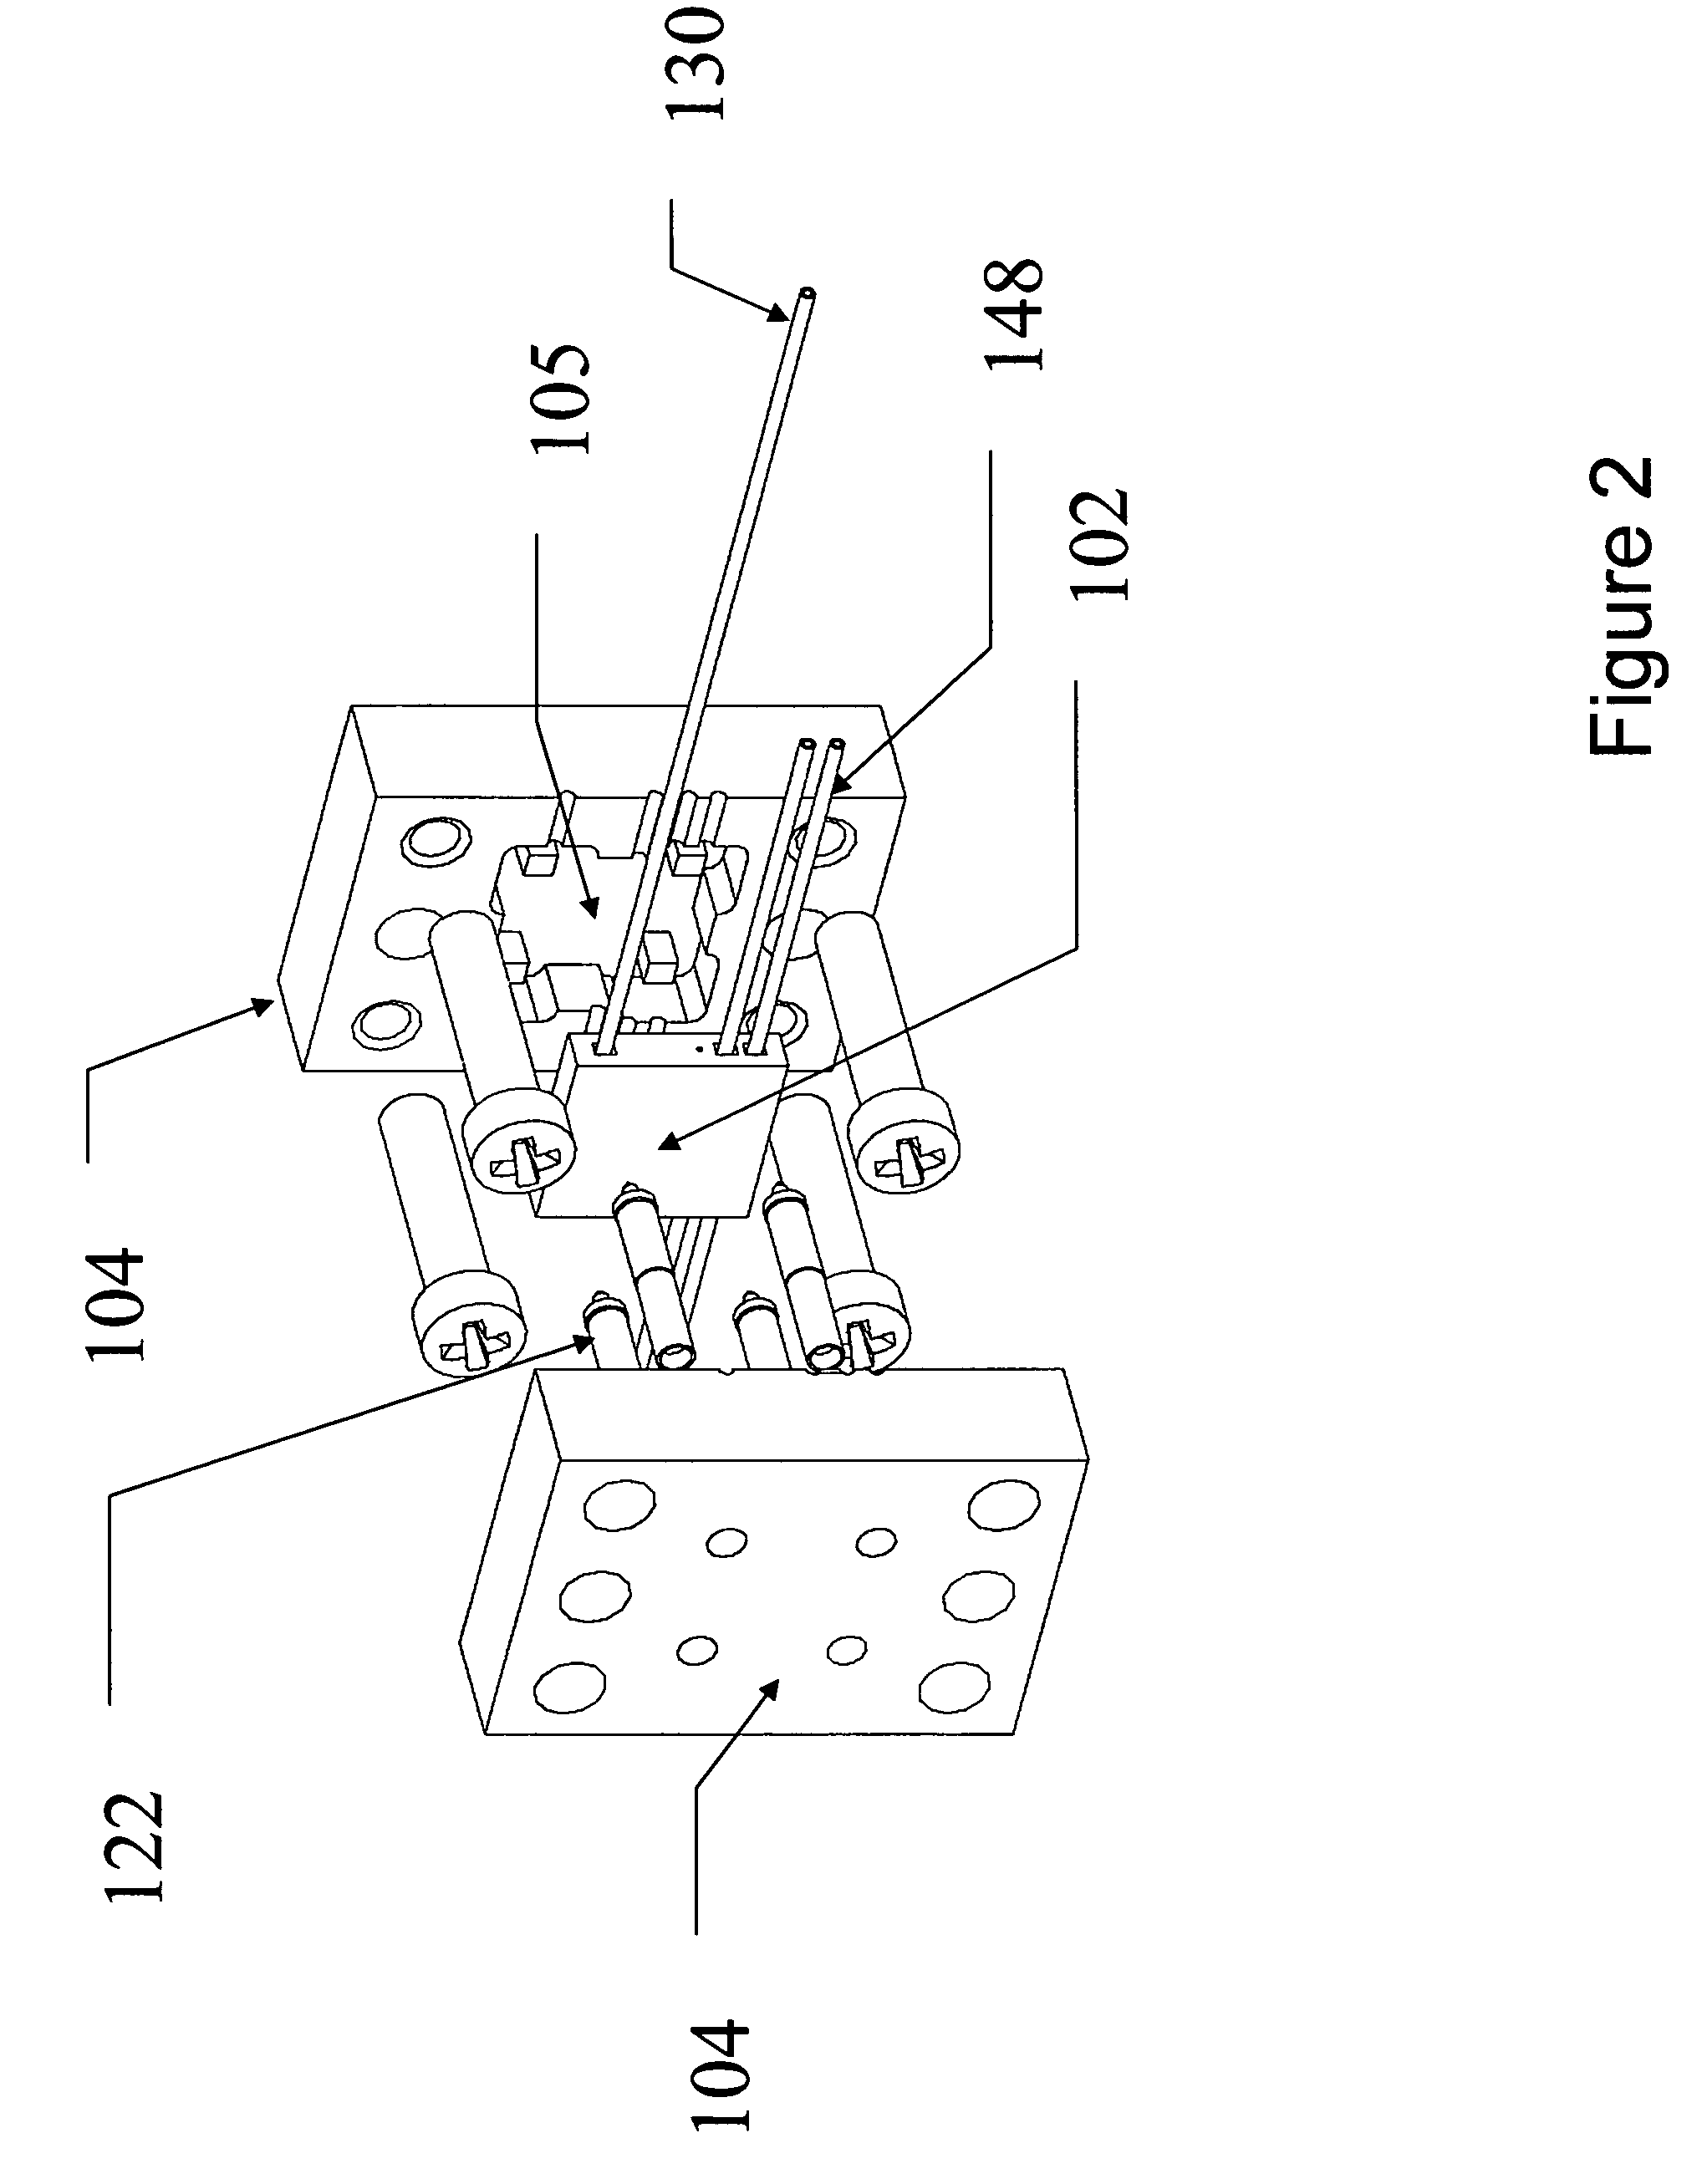 High pressure capillary micro-fluidic valve device and a method of fabricating same